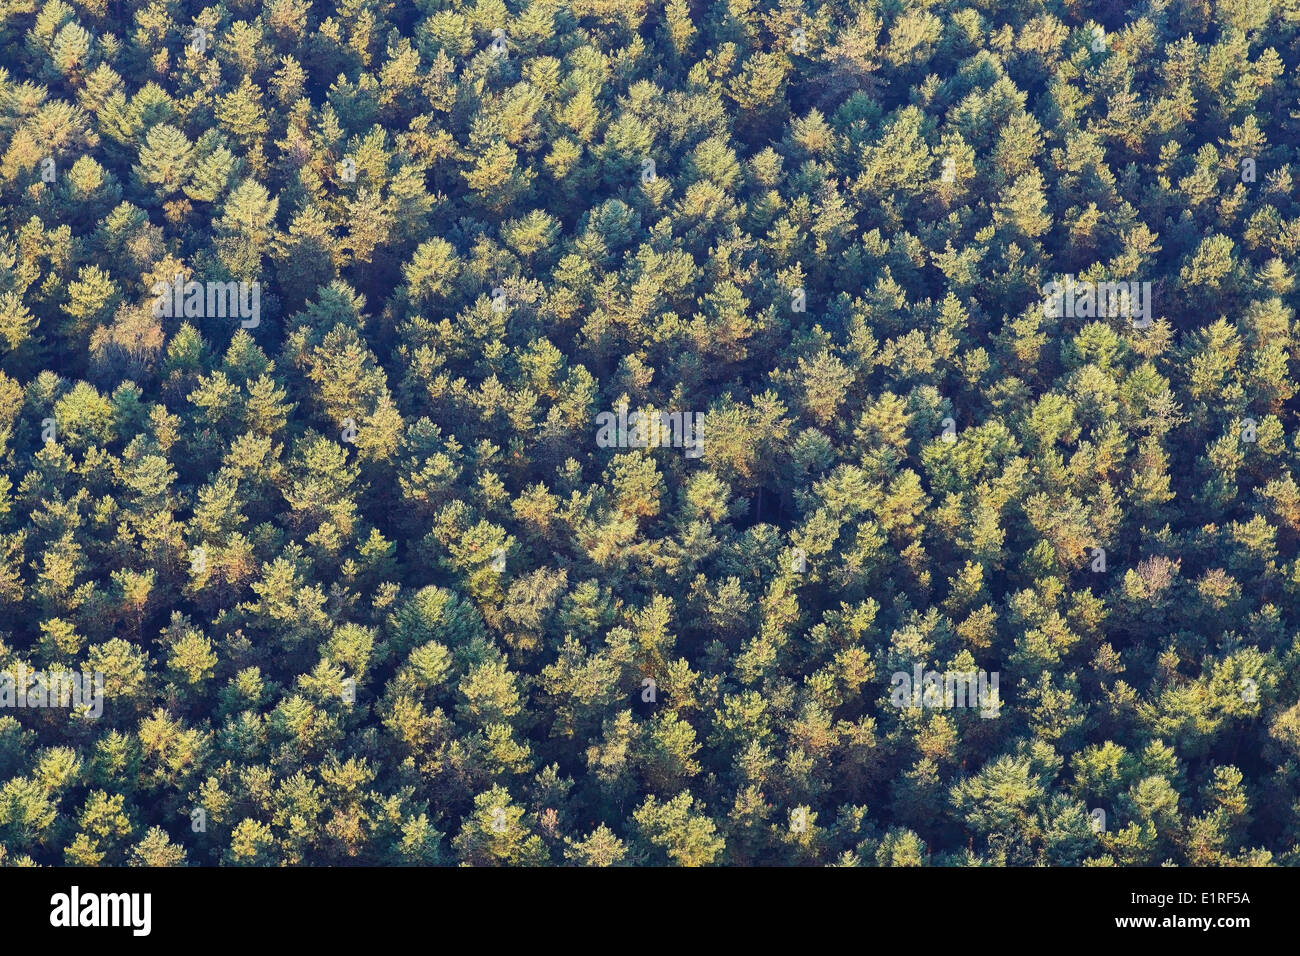 Aerial photograph of Pine forest Stock Photo